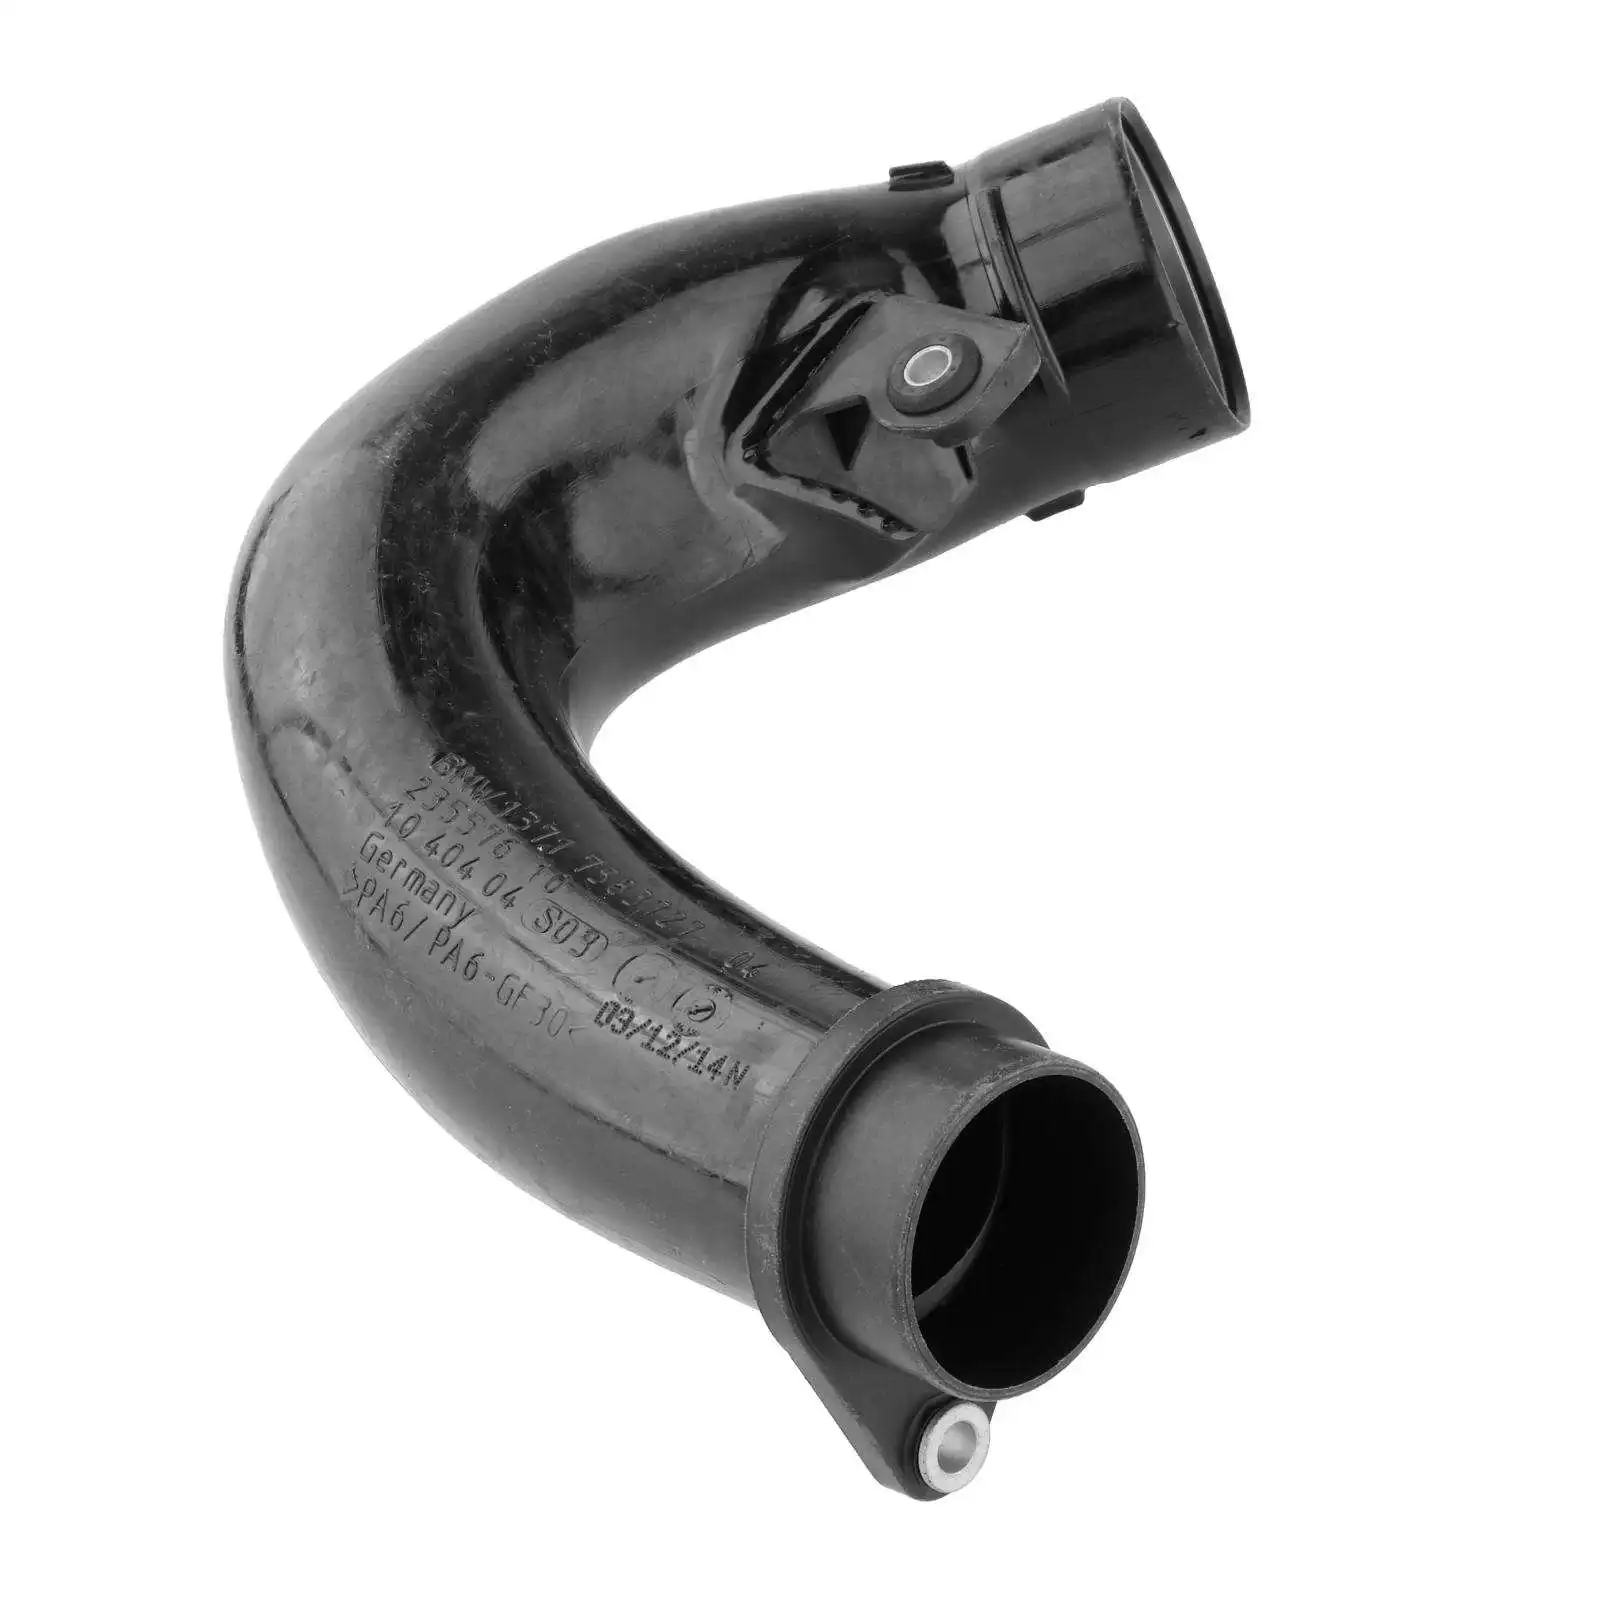 Air Intake Pipe Exhaust Parts Air Intake Tube Air Intake Hose Pipe for BMW 13717583727 Accessories Replace Parts Upgrade